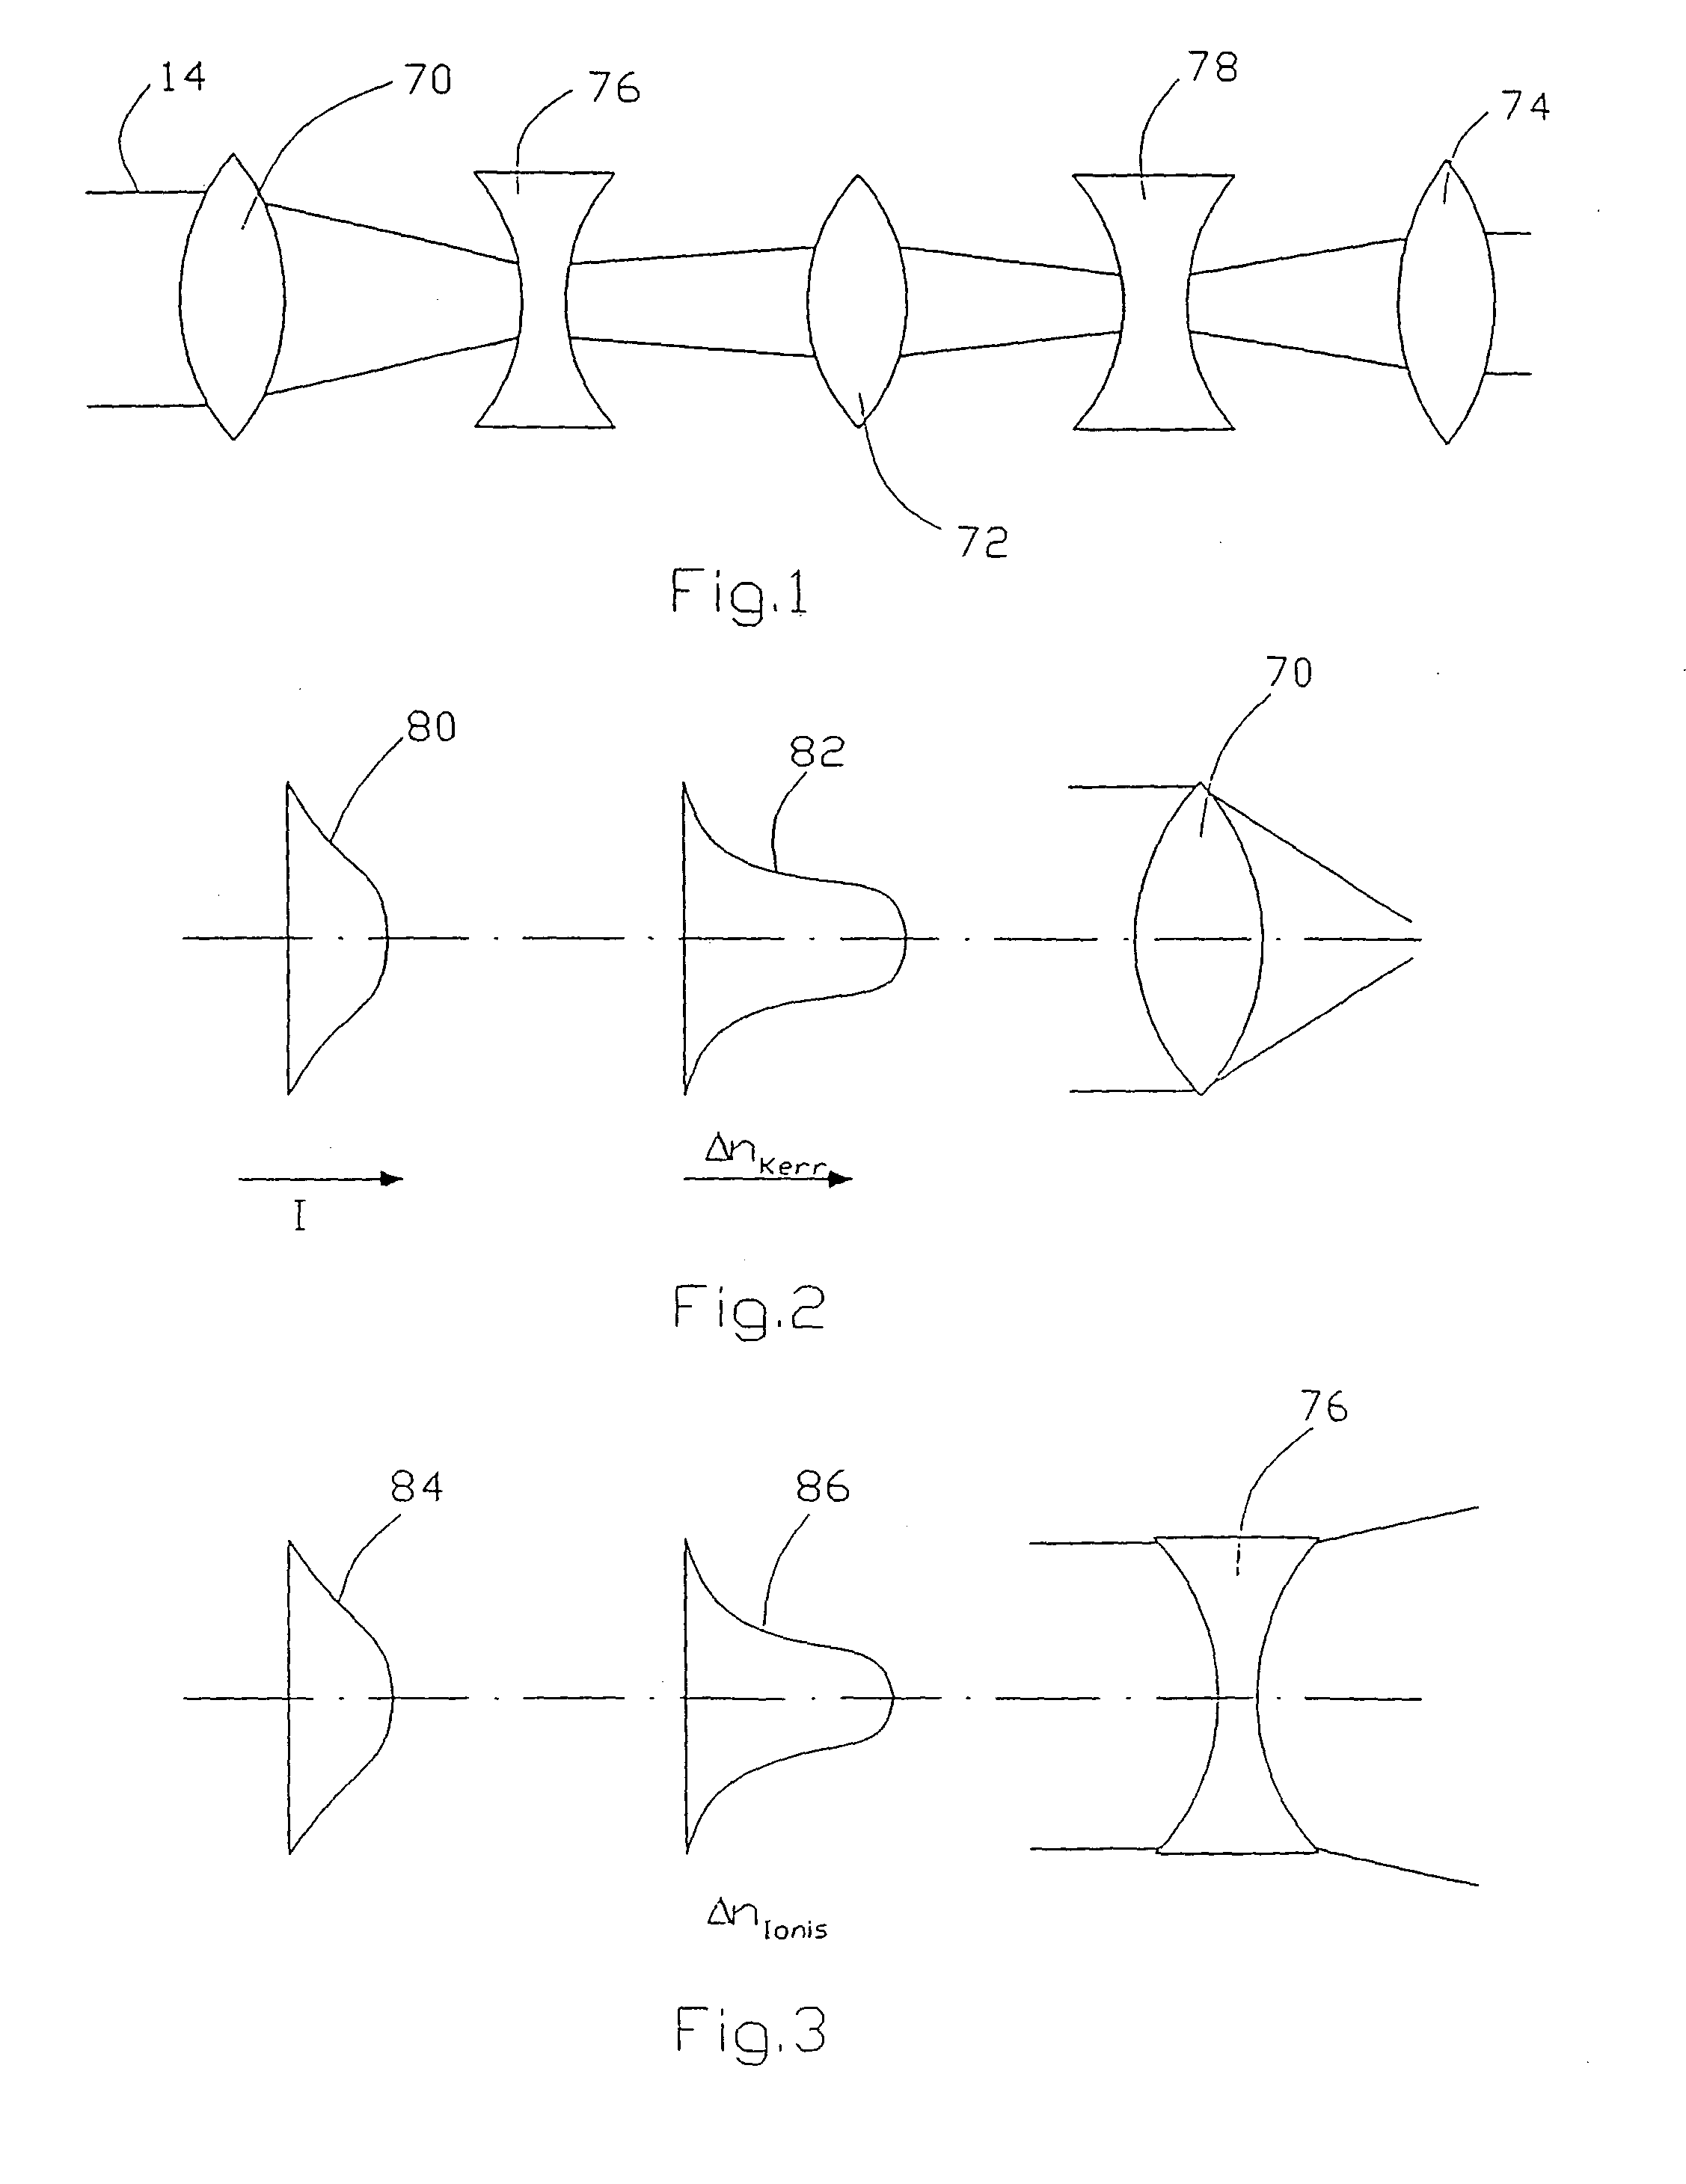 Method for material processing and/or material analysis using lasers